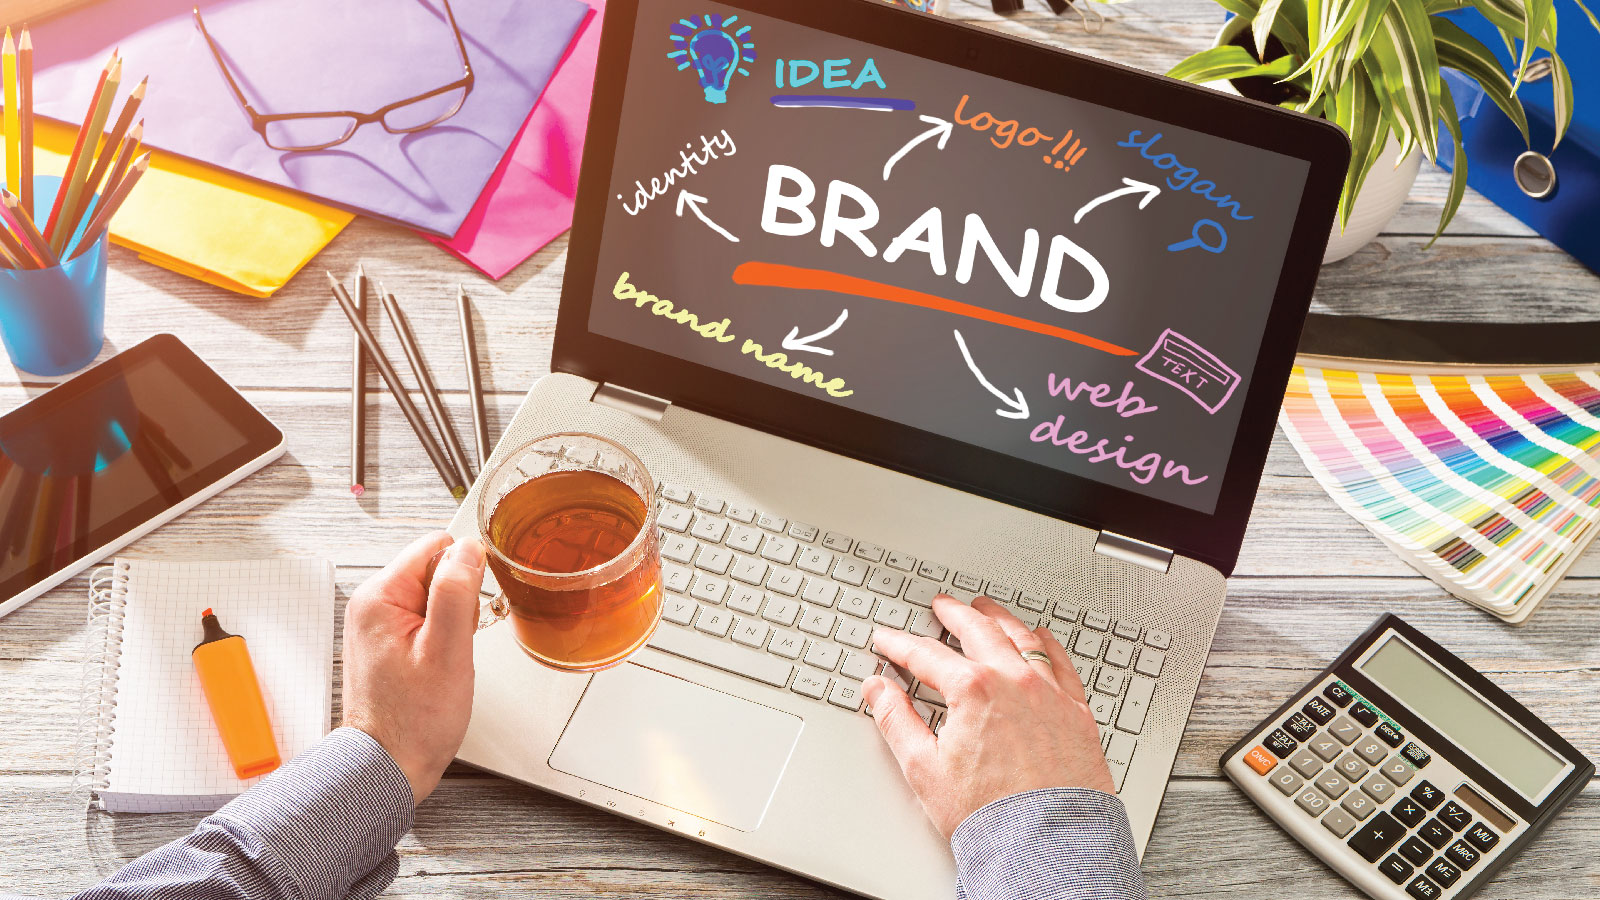 Business Branding 9 Online Business Courses You Should Consider Taking - 4